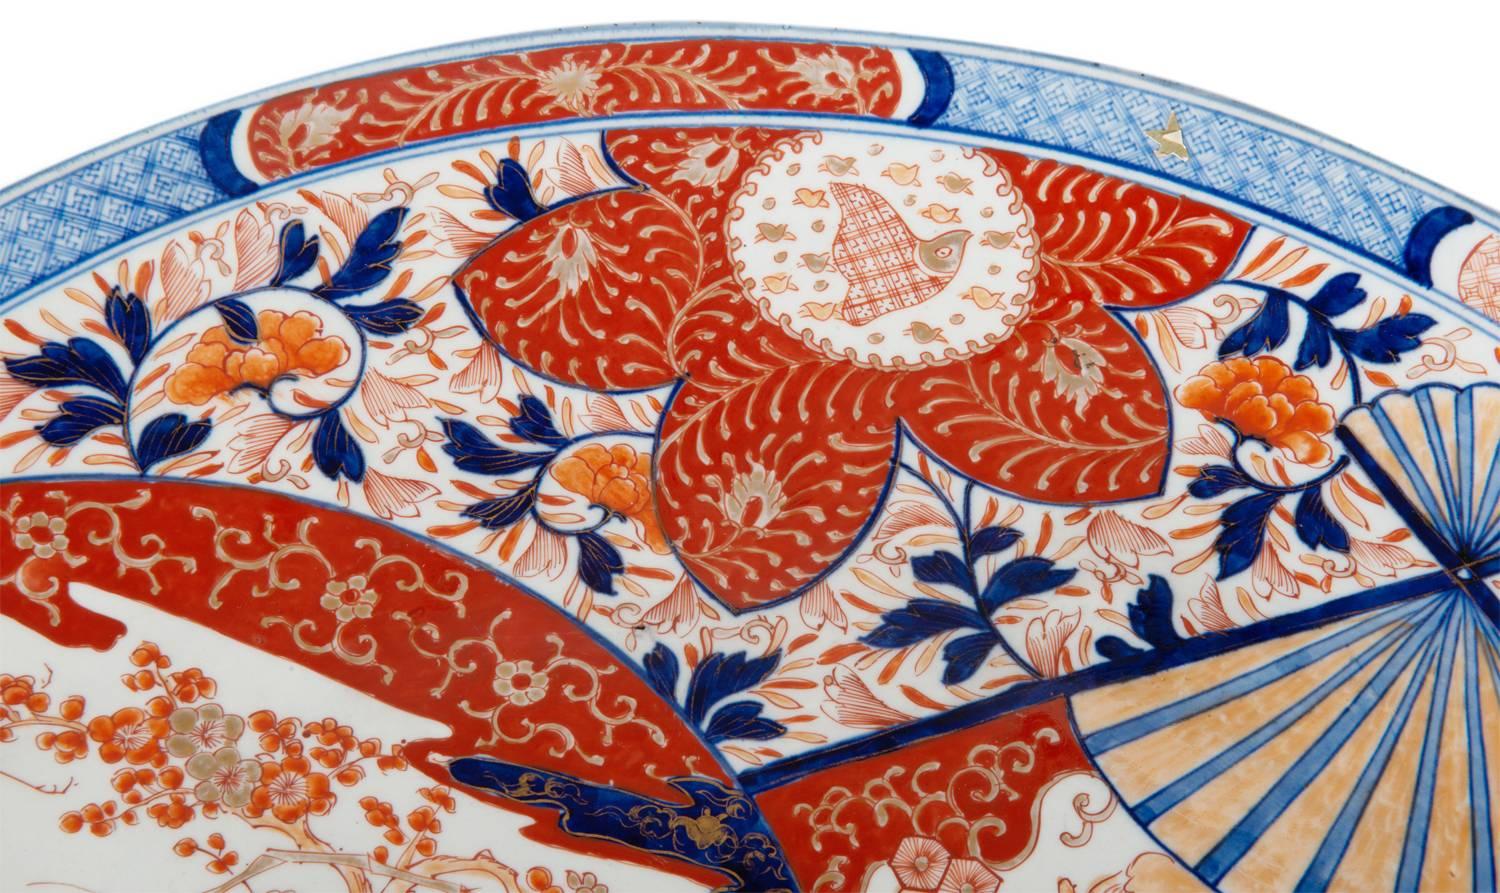 A very good quality mid-19th century Japanese Imari charger, having the classical Imari blue and orange coloring. With floral and motif decoration and inset painted panels in the shape of a fan and mirror.